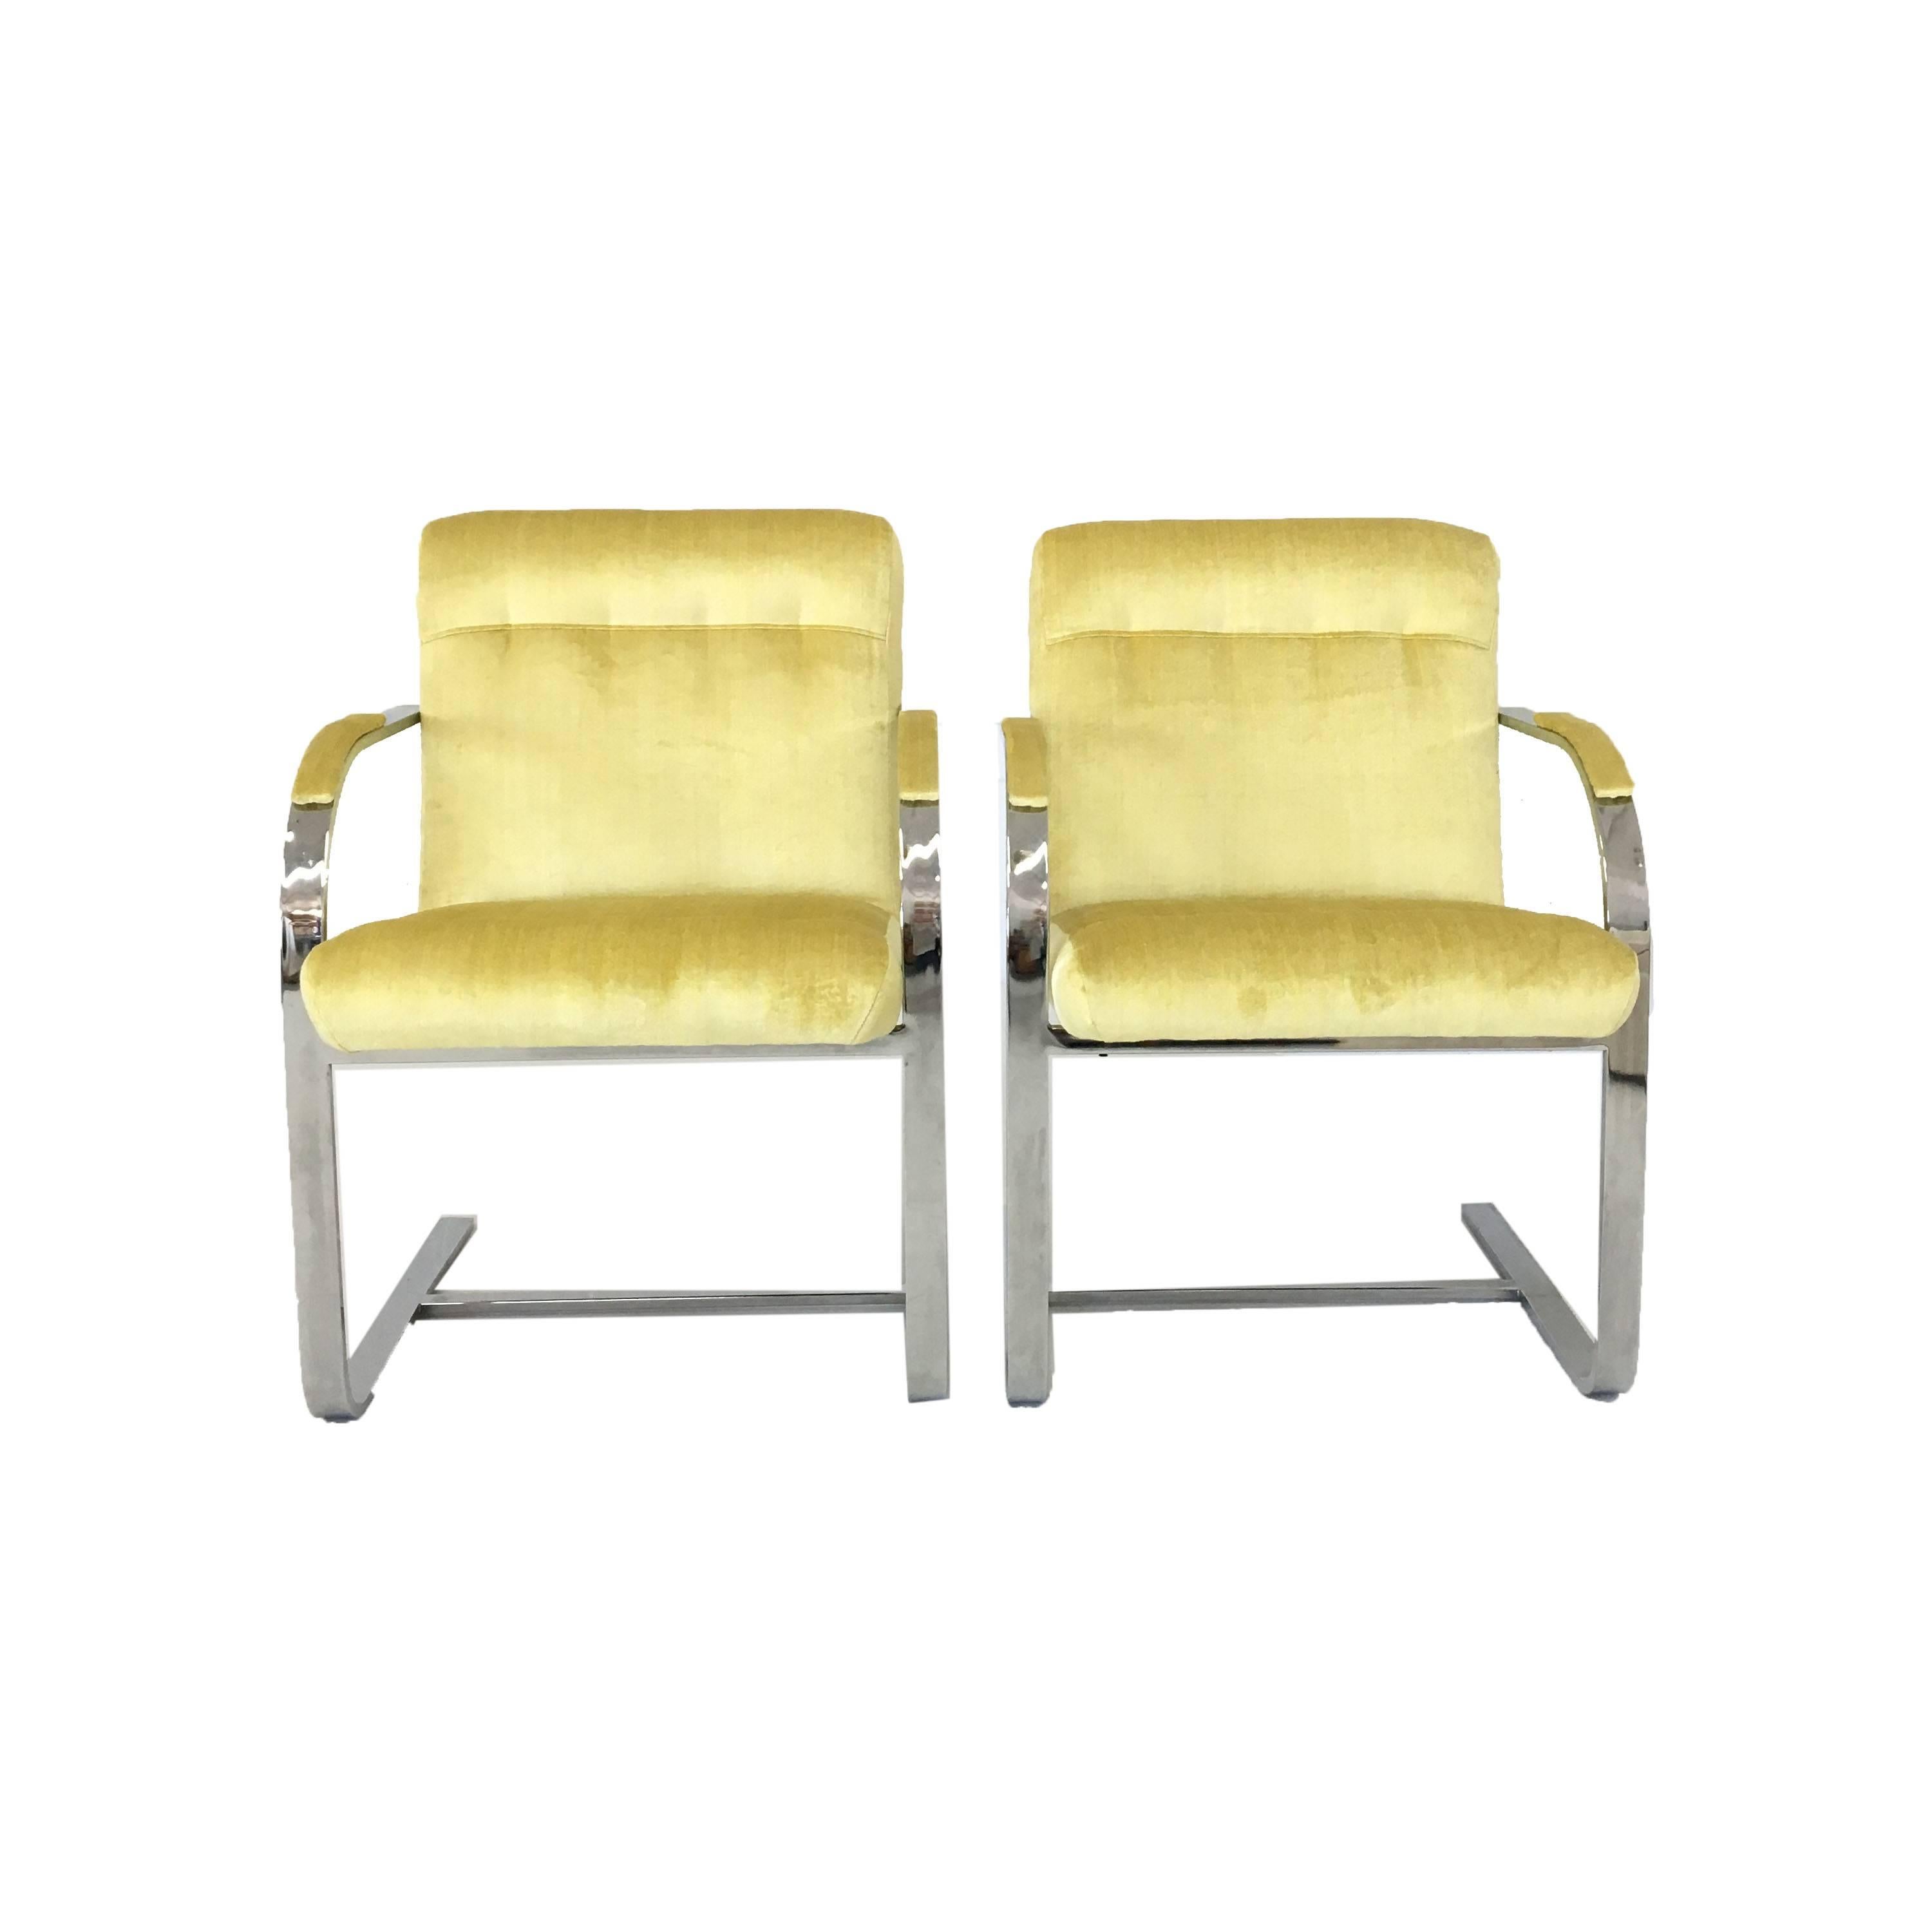 Set of Mid-Century Modern Chrome Framed Canary Velvet Chairs In Good Condition For Sale In New Hyde Park, NY